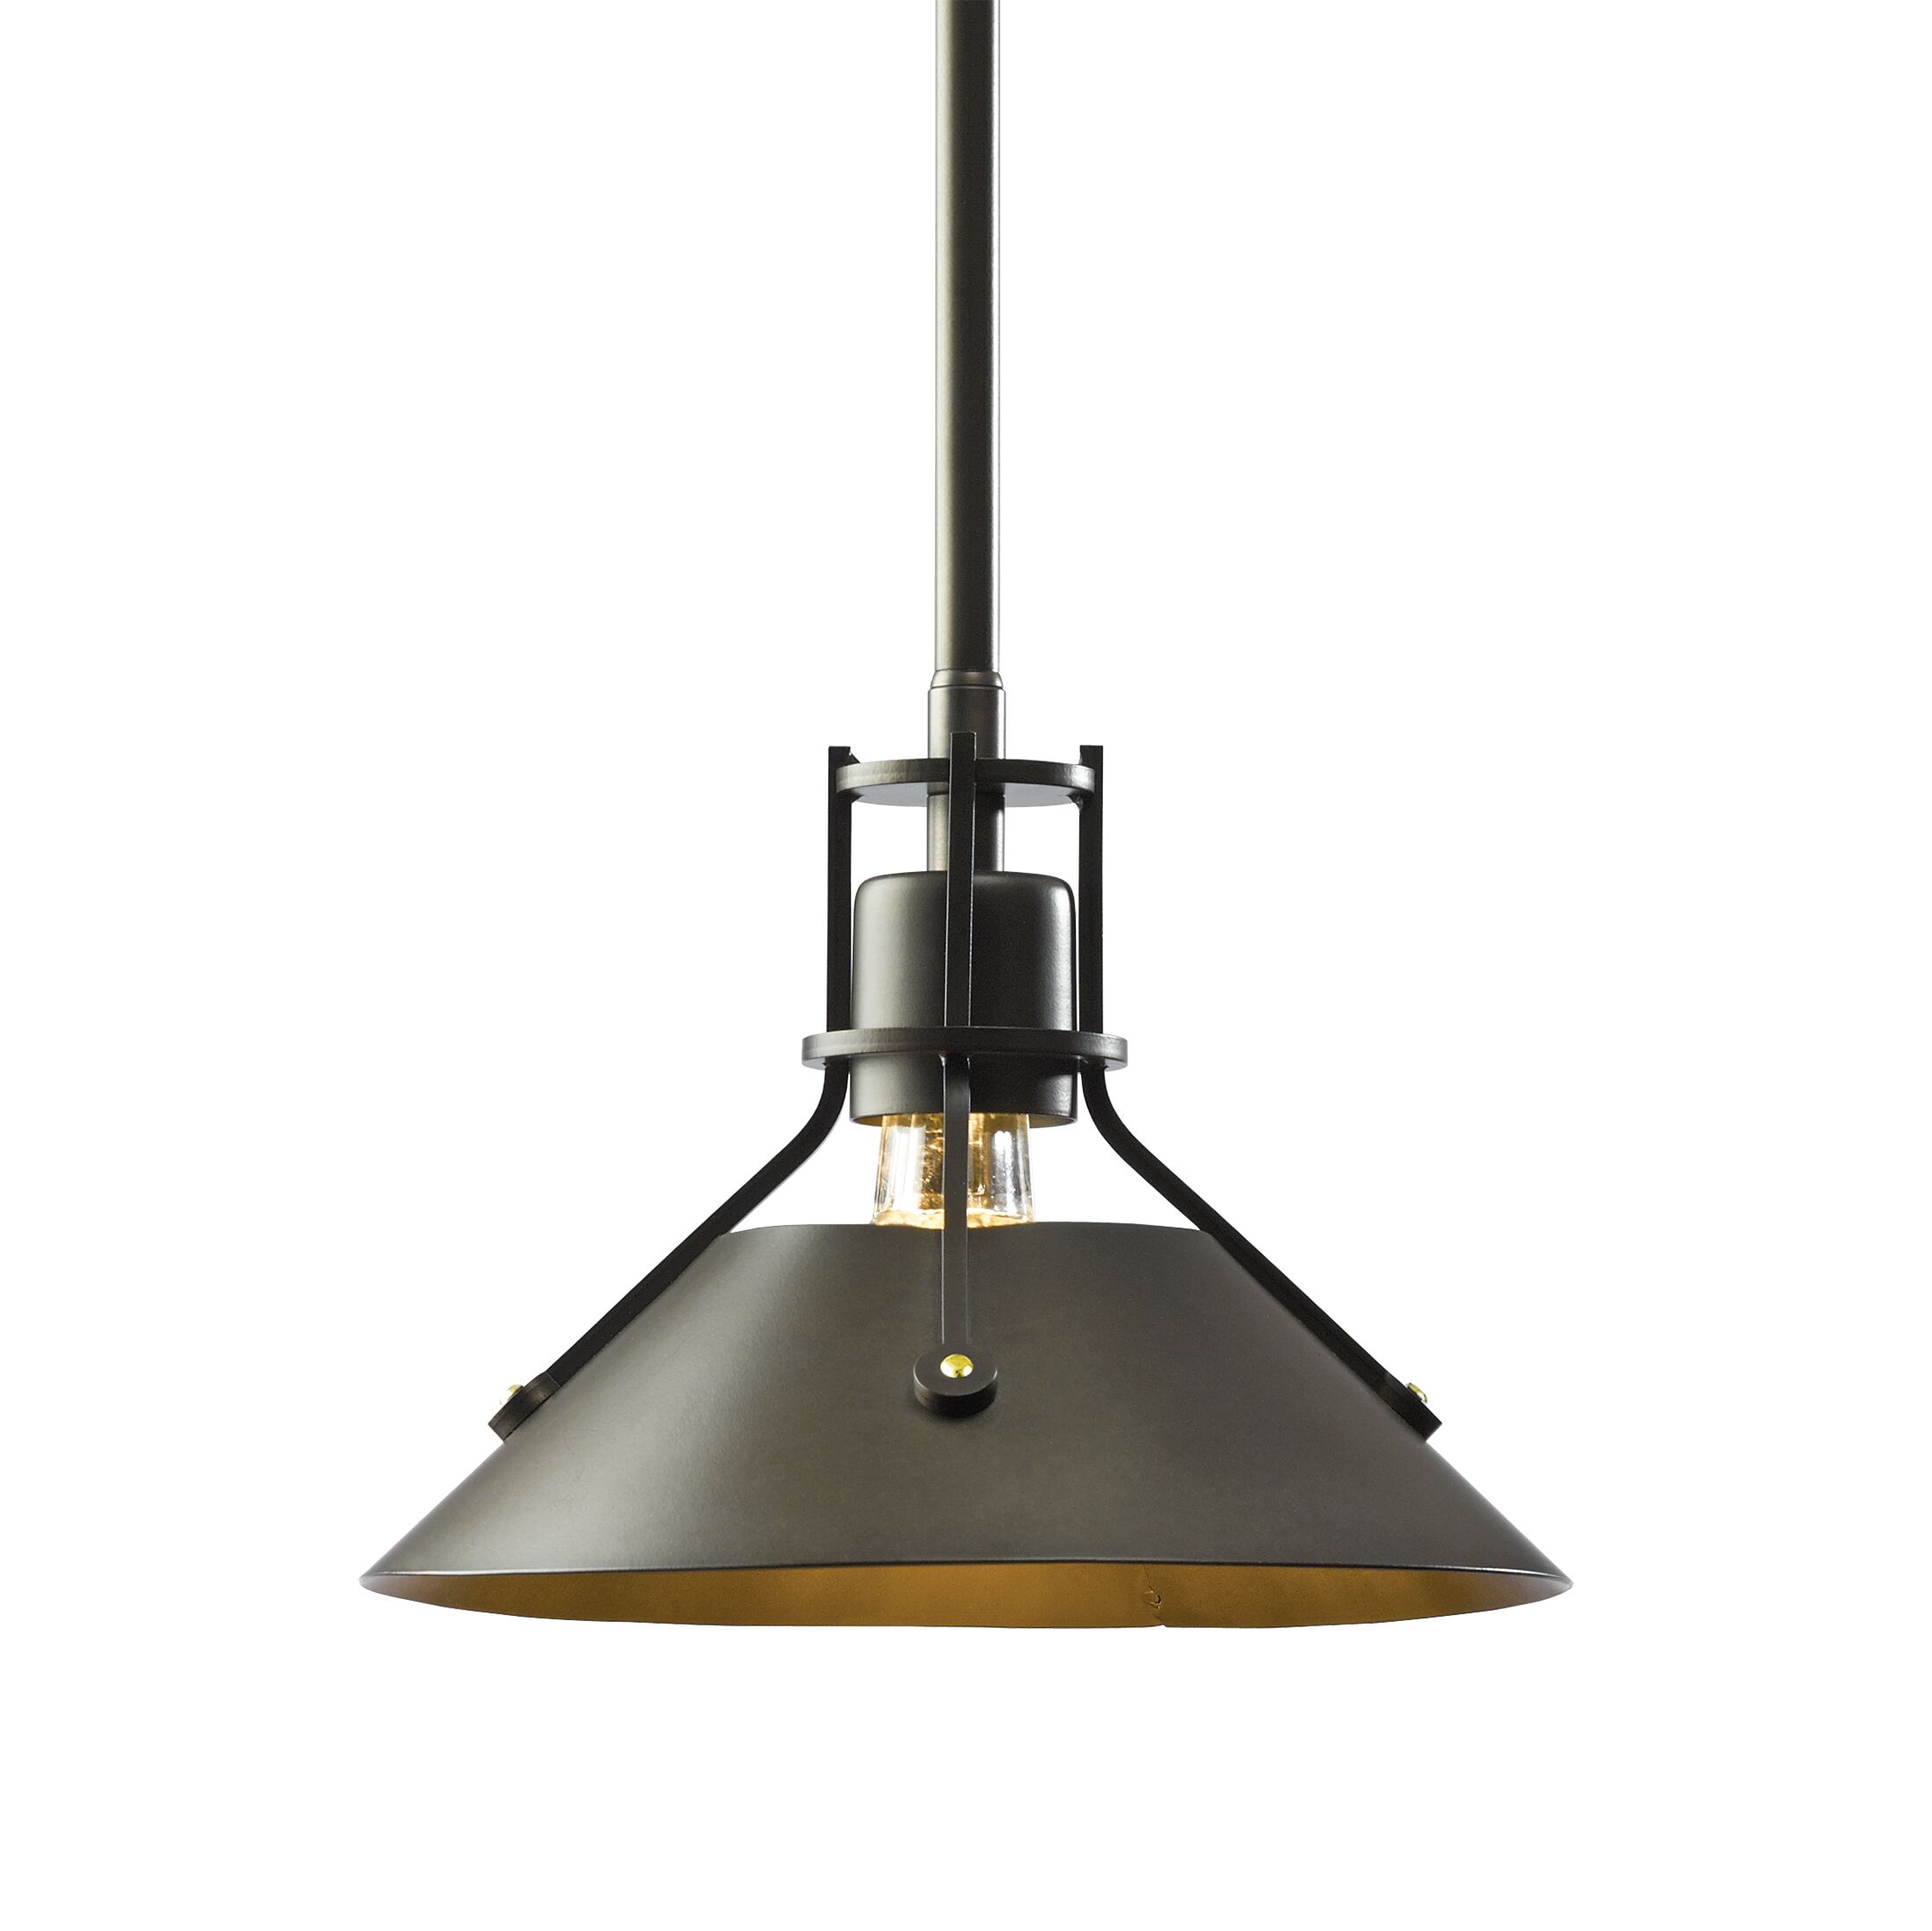 HUBB 184250-SKT-STND-10-20 BLACK BASE WITH NATURAL IRON SHADE  ADJU HGT 35.2""43.2"OAH  1 100A SHADE 7.3"H 9.2"W IS INCLUDED IN HGT